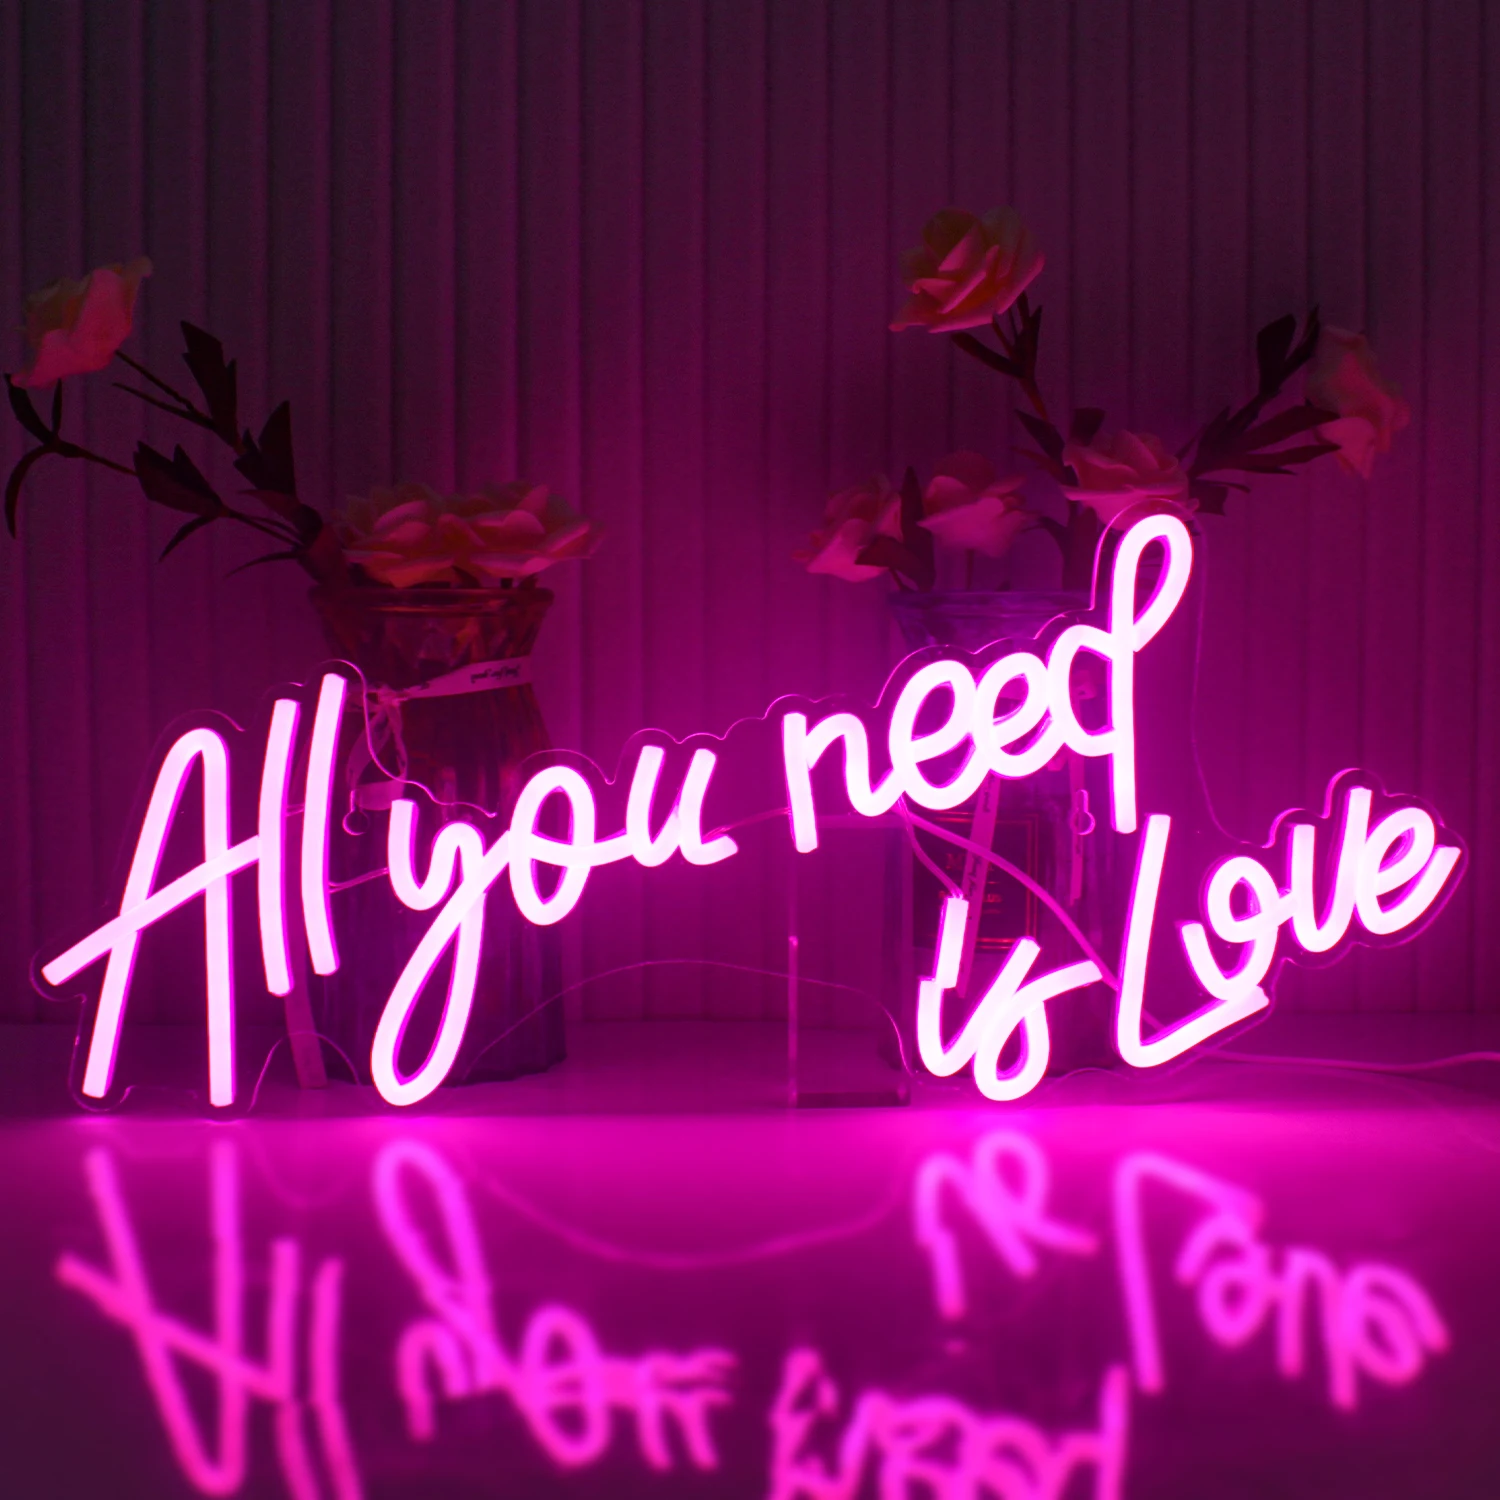 

Ineonlife Neon Sign All You Need Is Love LED Light USB powered Art Home Wedding Confession Party Aesthetic Bedroom Wall Decor